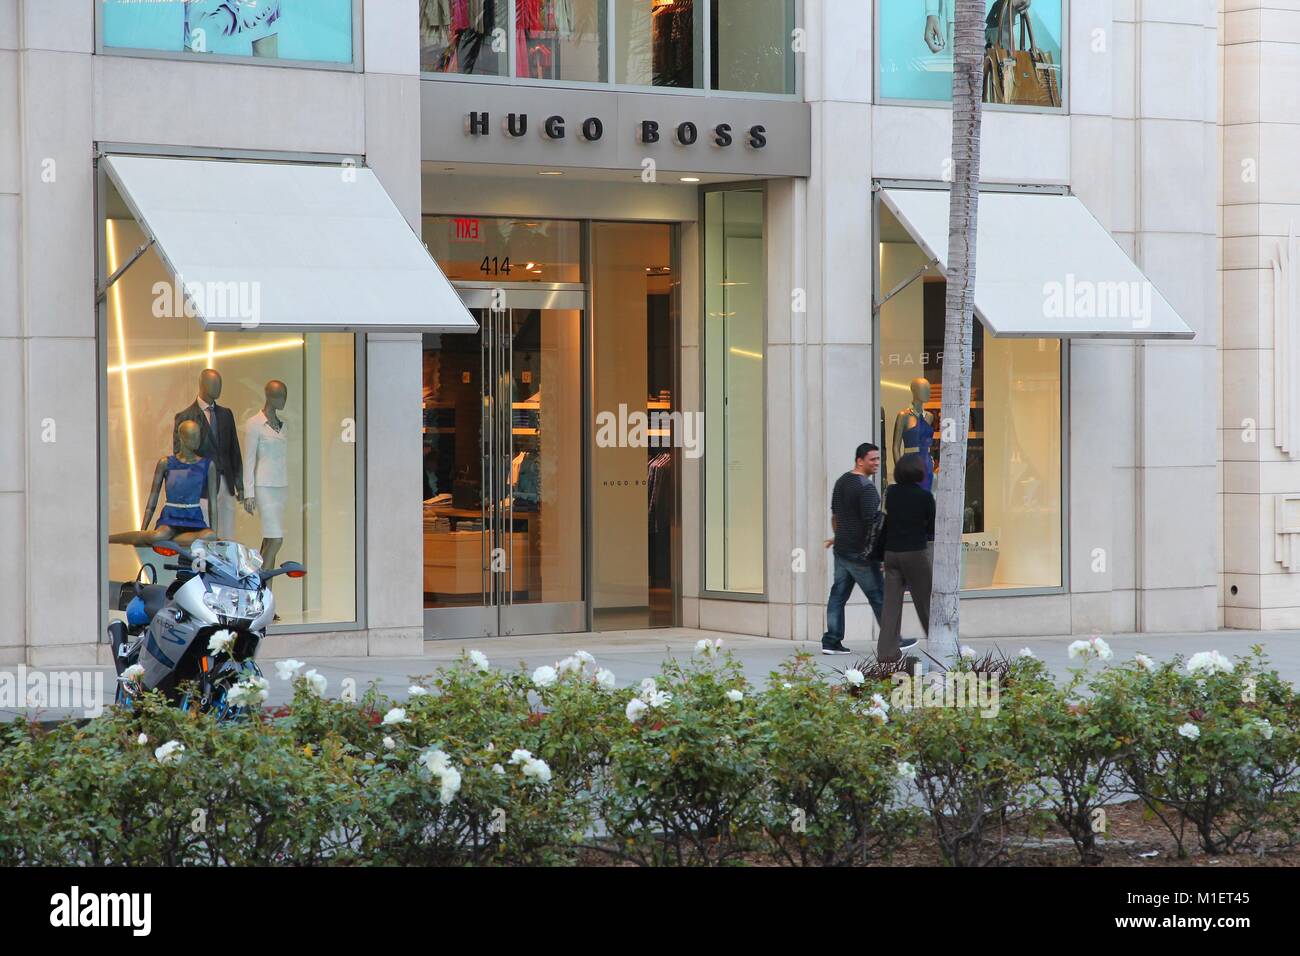 LOS ANGELES, USA - APRIL 5, 2014: Shoppers visit Hugo Boss store in Beverly  Hills, Los Angeles. Hugo Boss is a German luxury fashion house 263 million  Stock Photo - Alamy